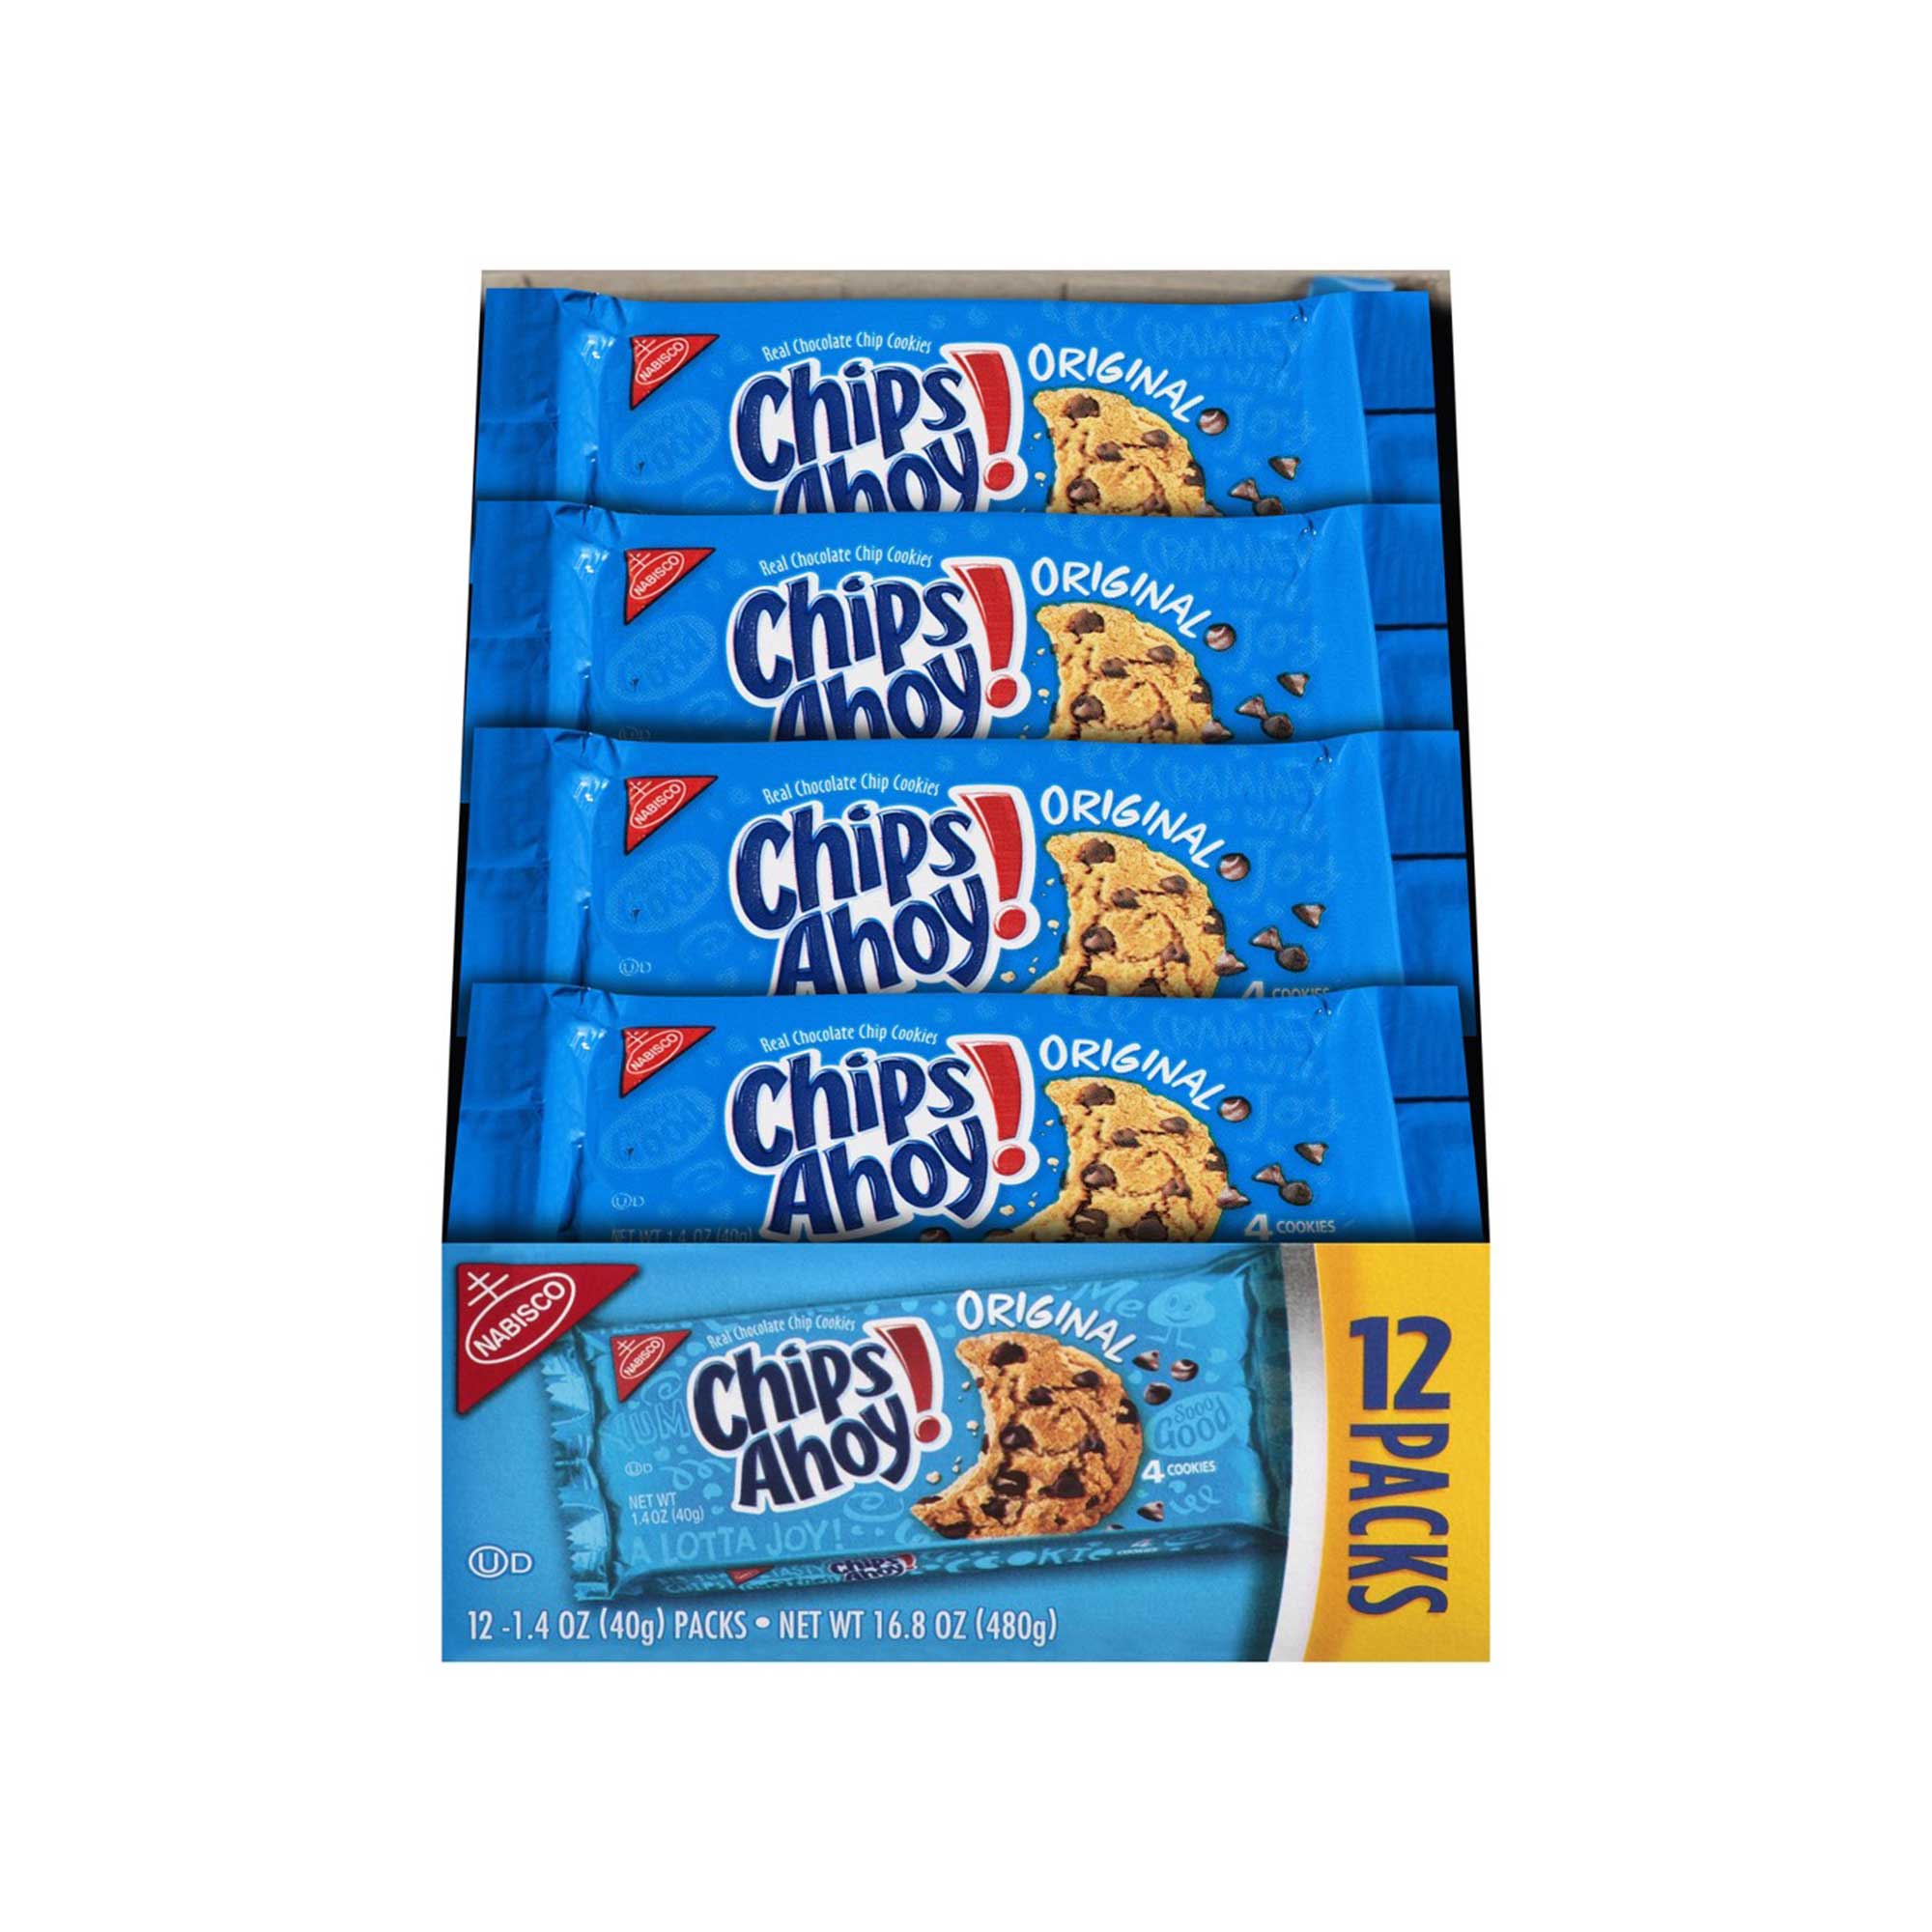 CHIPS AHOY! Original Chocolate Chip Cookies, 13 oz [12-Pack]